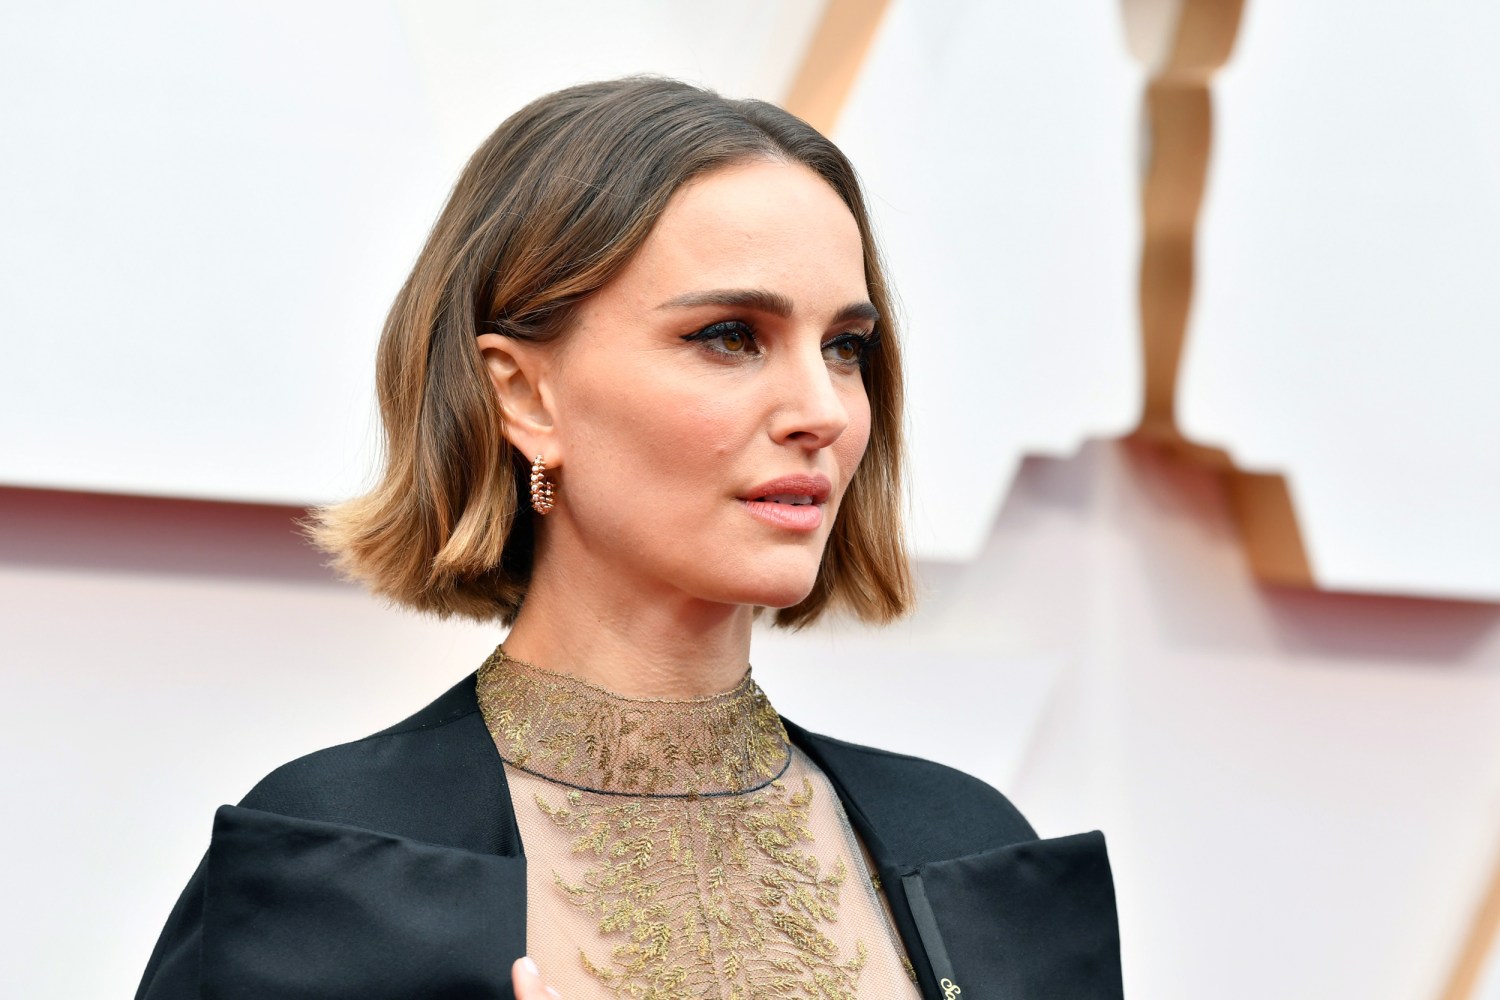 Natalie Portman says playing sexualized characters as a teenage actor made her afraid